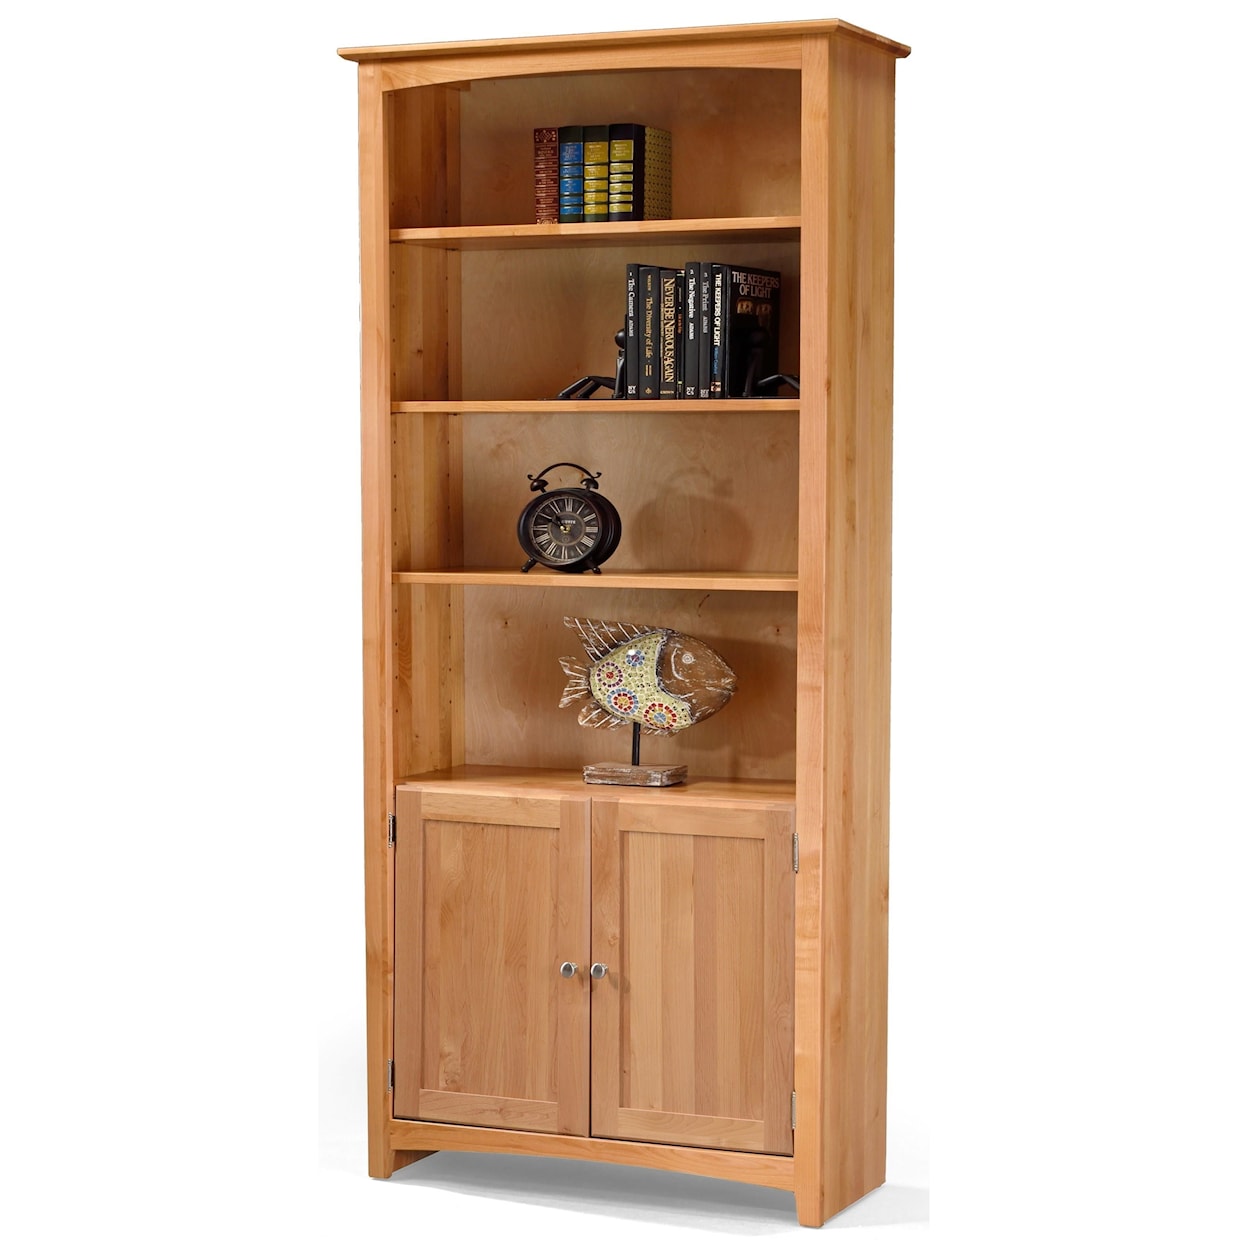 Archbold Furniture Alder Bookcases Customizable 36 X 84 Bookcase with Doors